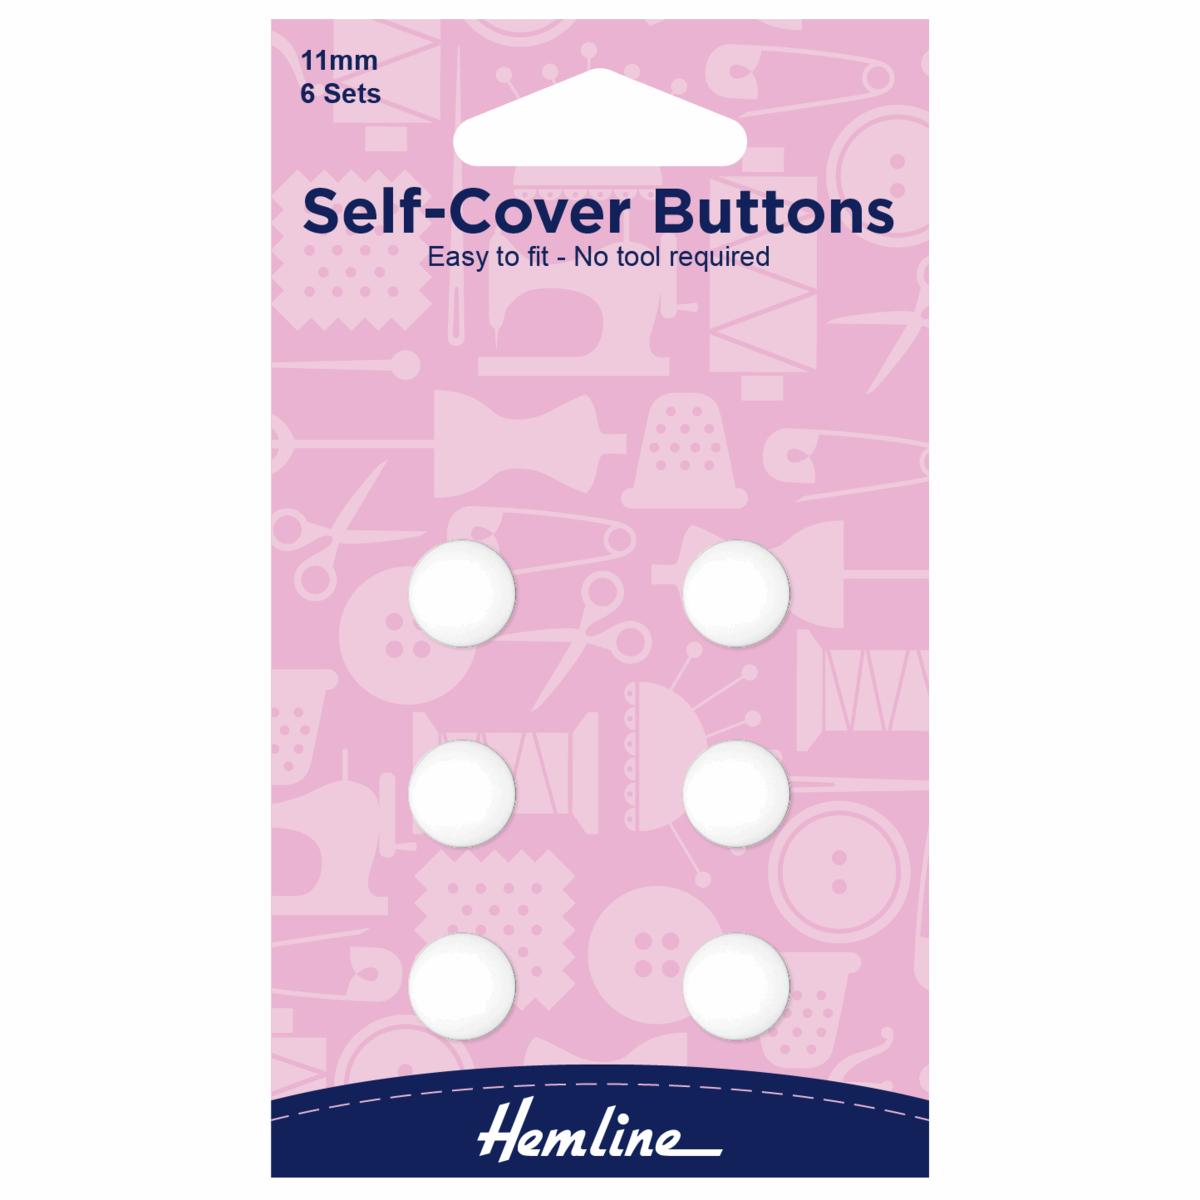 Self-Cover Nylon Buttons - 11mm (Pack of 6 Sets)